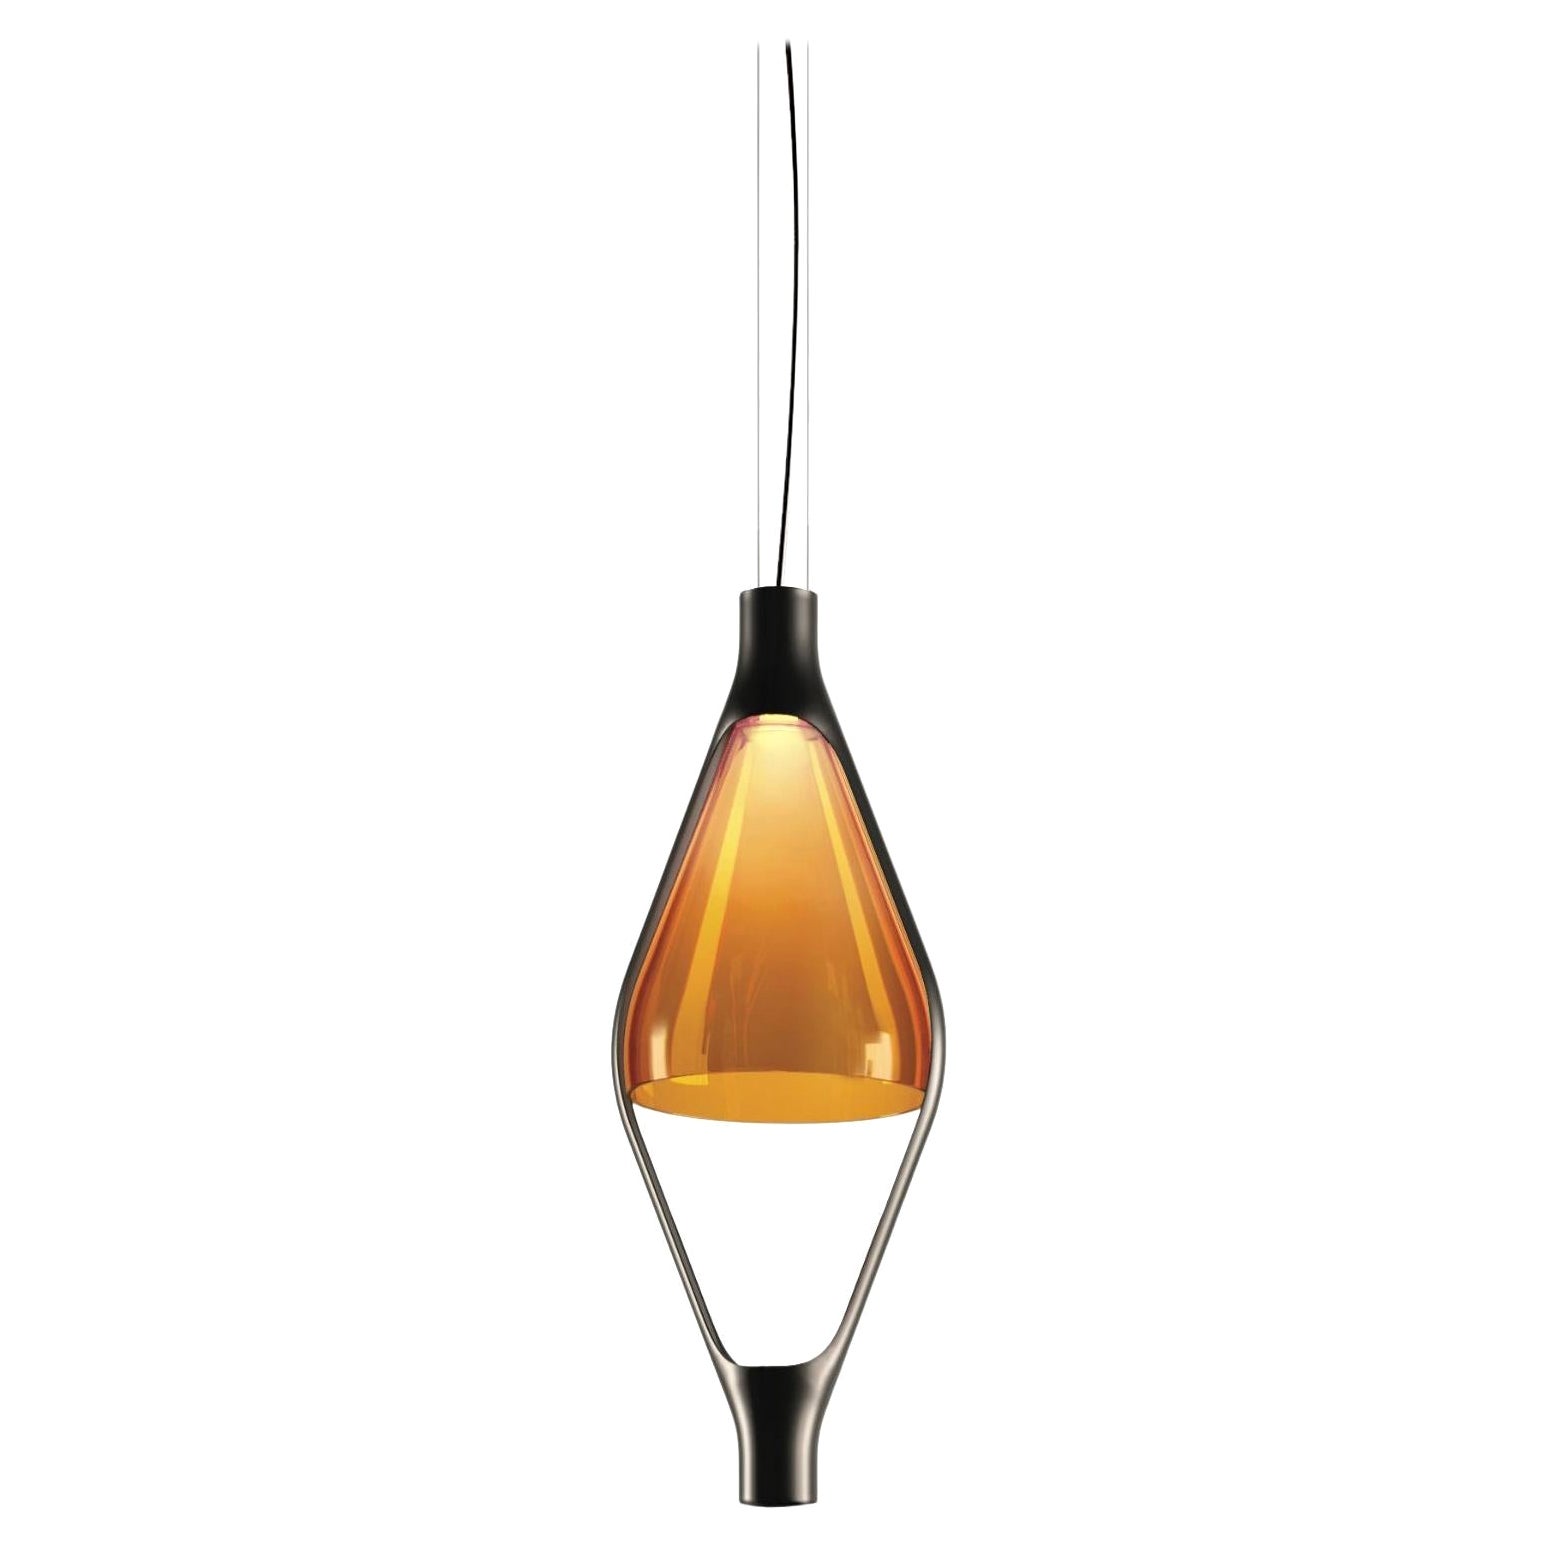 'Viceversa' Modular Suspension Lamp by Noé Lawrance for Kdln in Amber